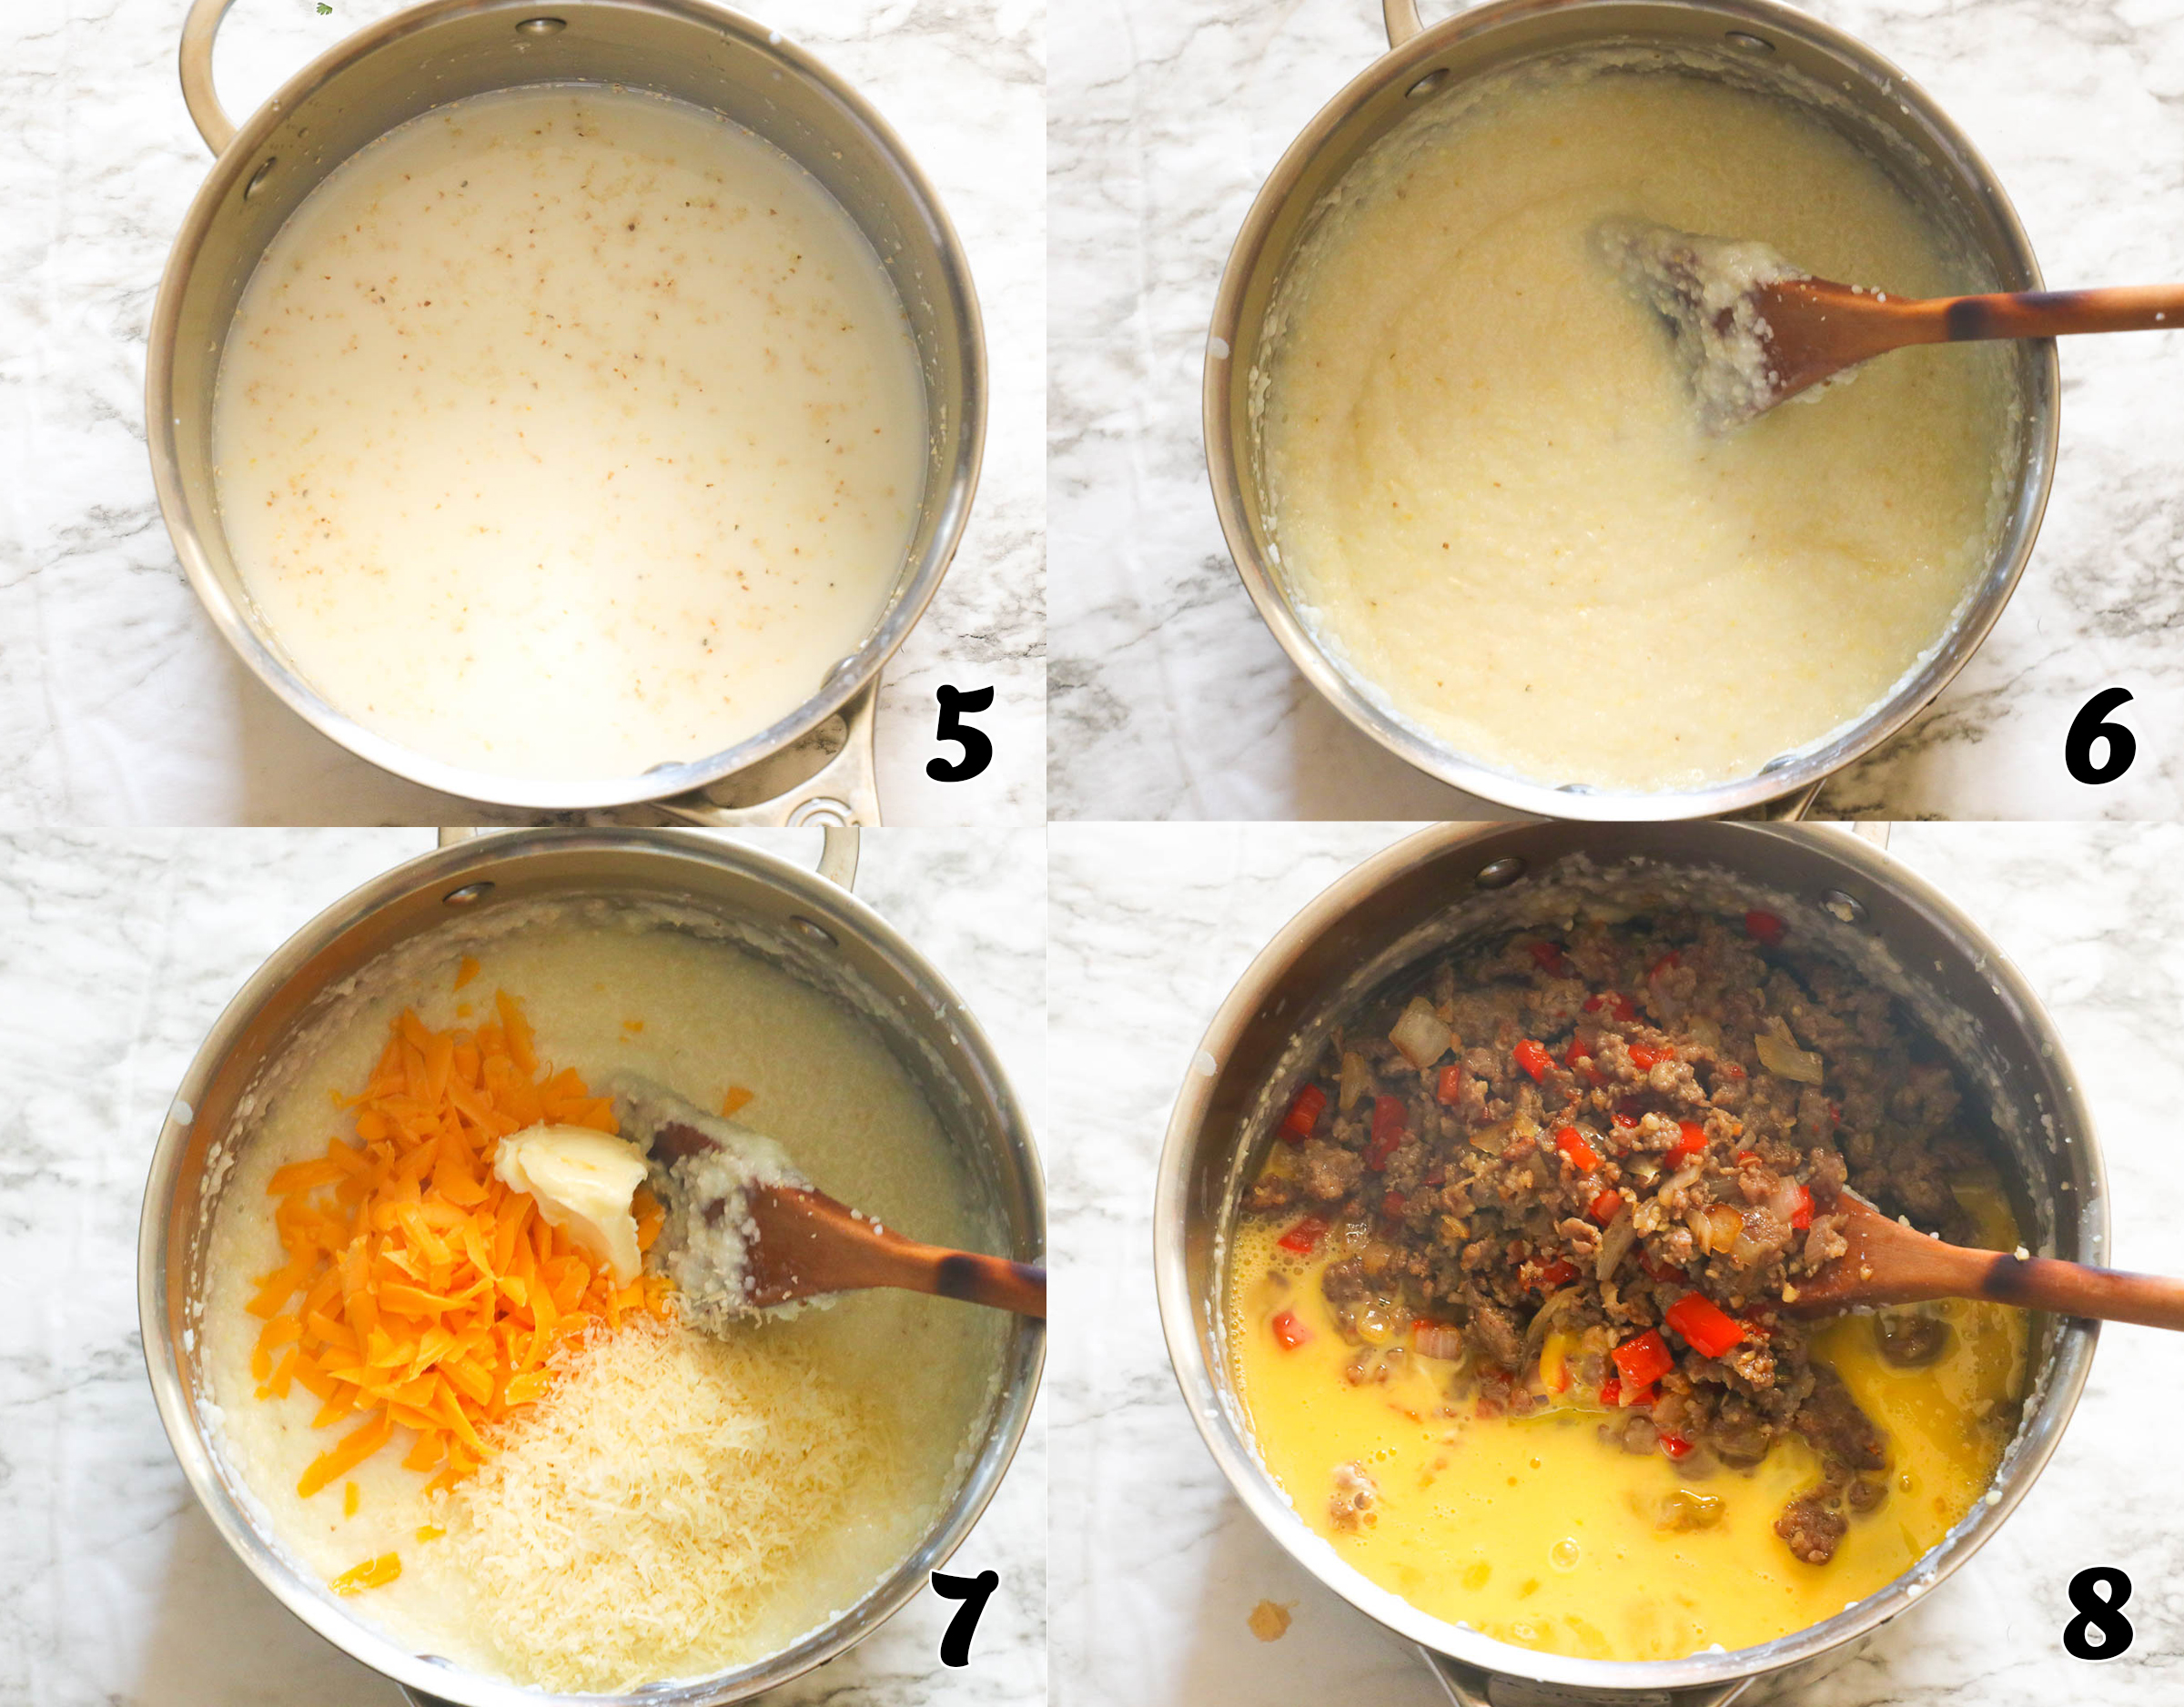 Grits casserole step-by-step process